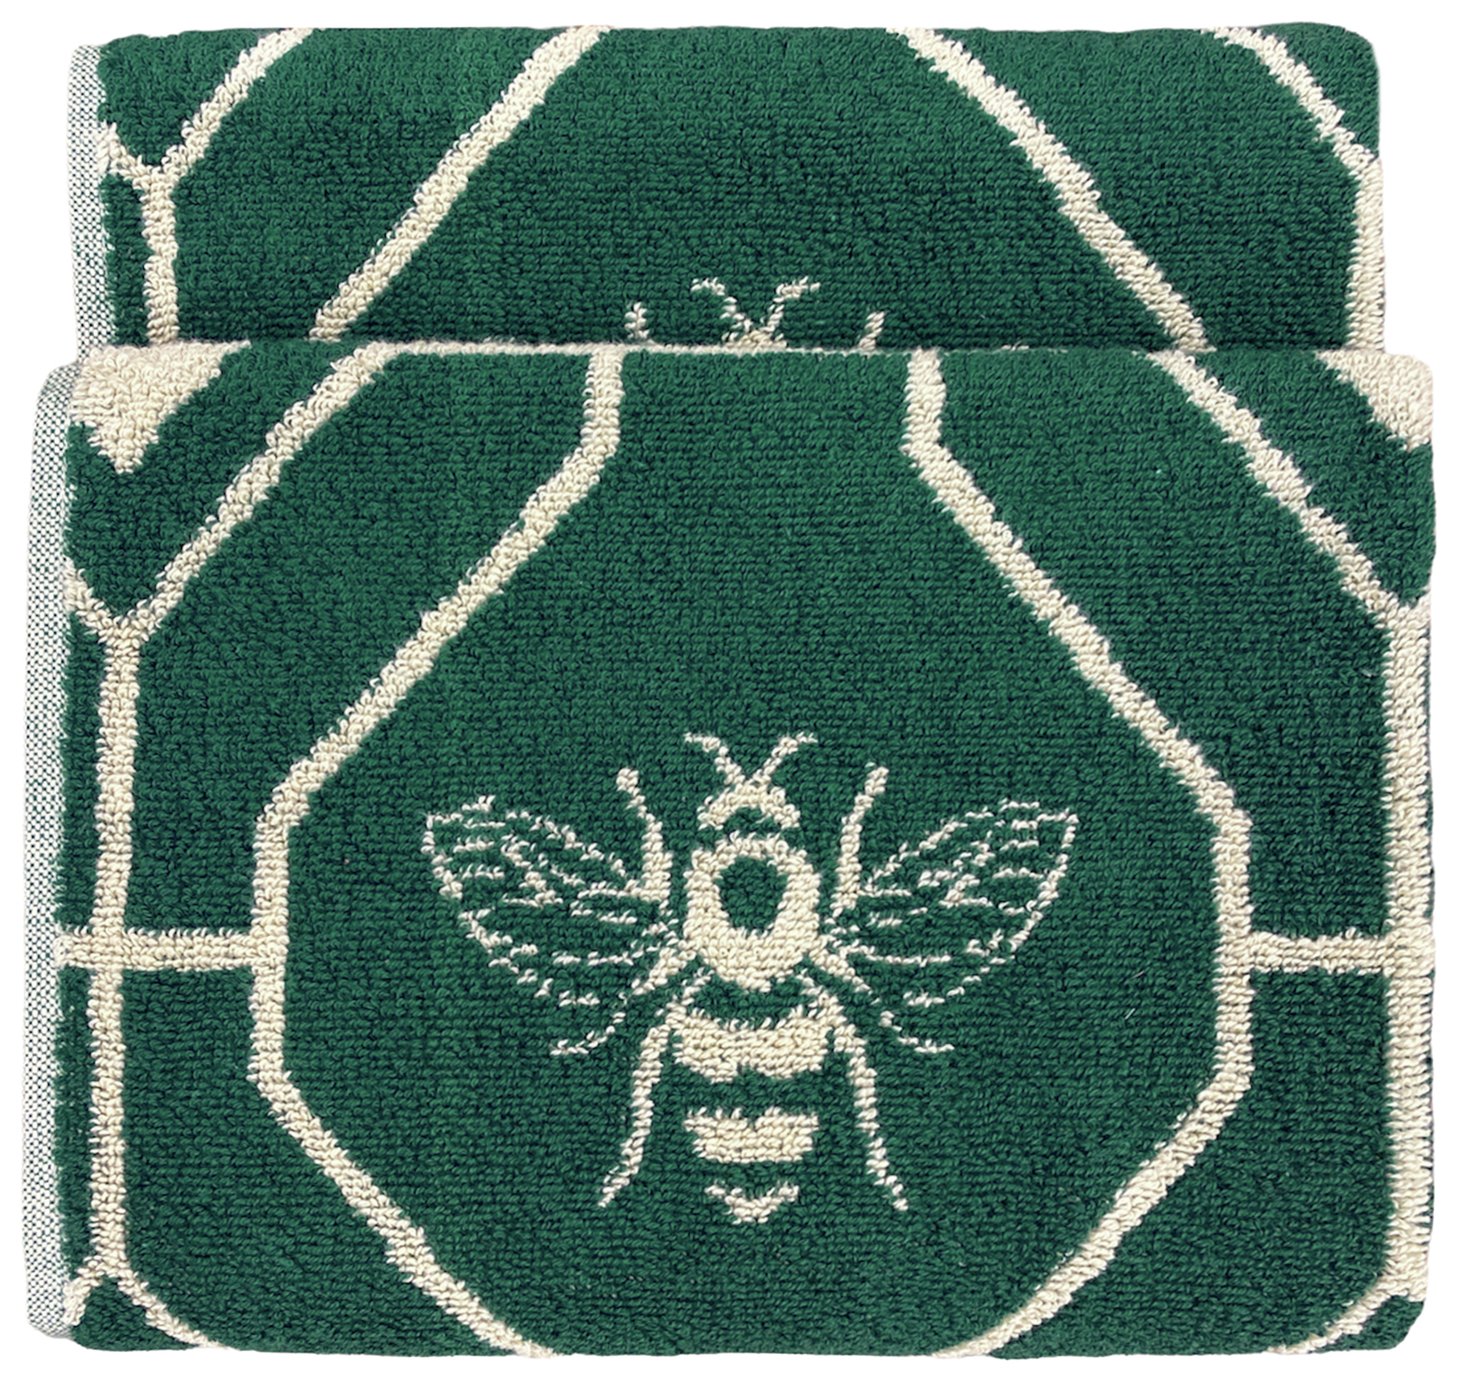 Furn Bee Deco Patterned Hand Towel - Emerald Green